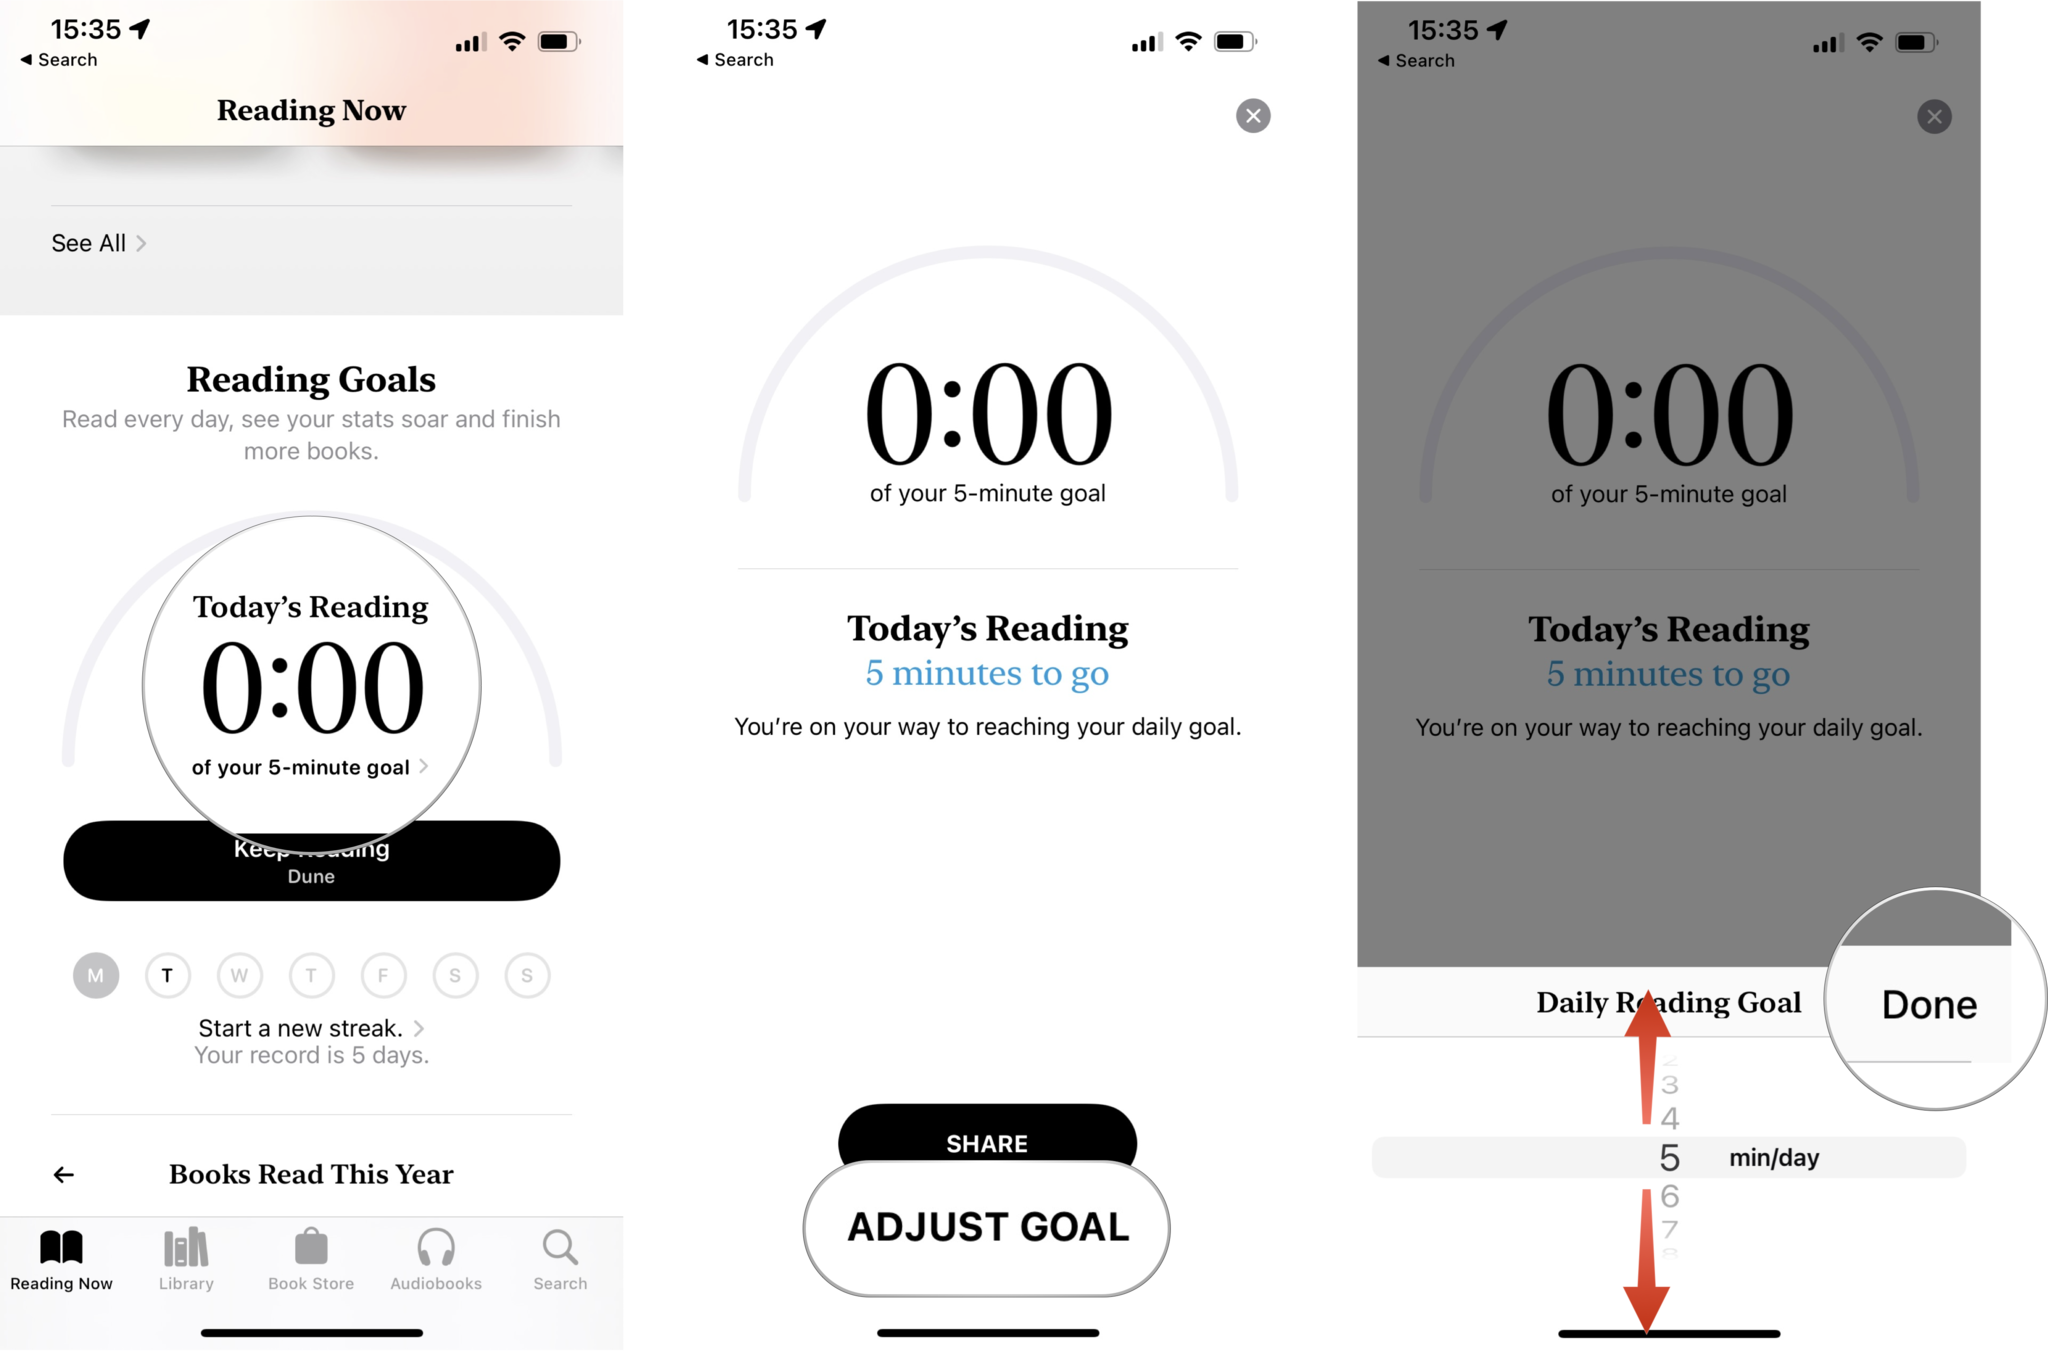 How to set reading goals in Apple Books on iPhone and iPad: Tap Today's Reading, tap Adjust Goal, swipe on the counter to set a reading goal in minutes, tap Done